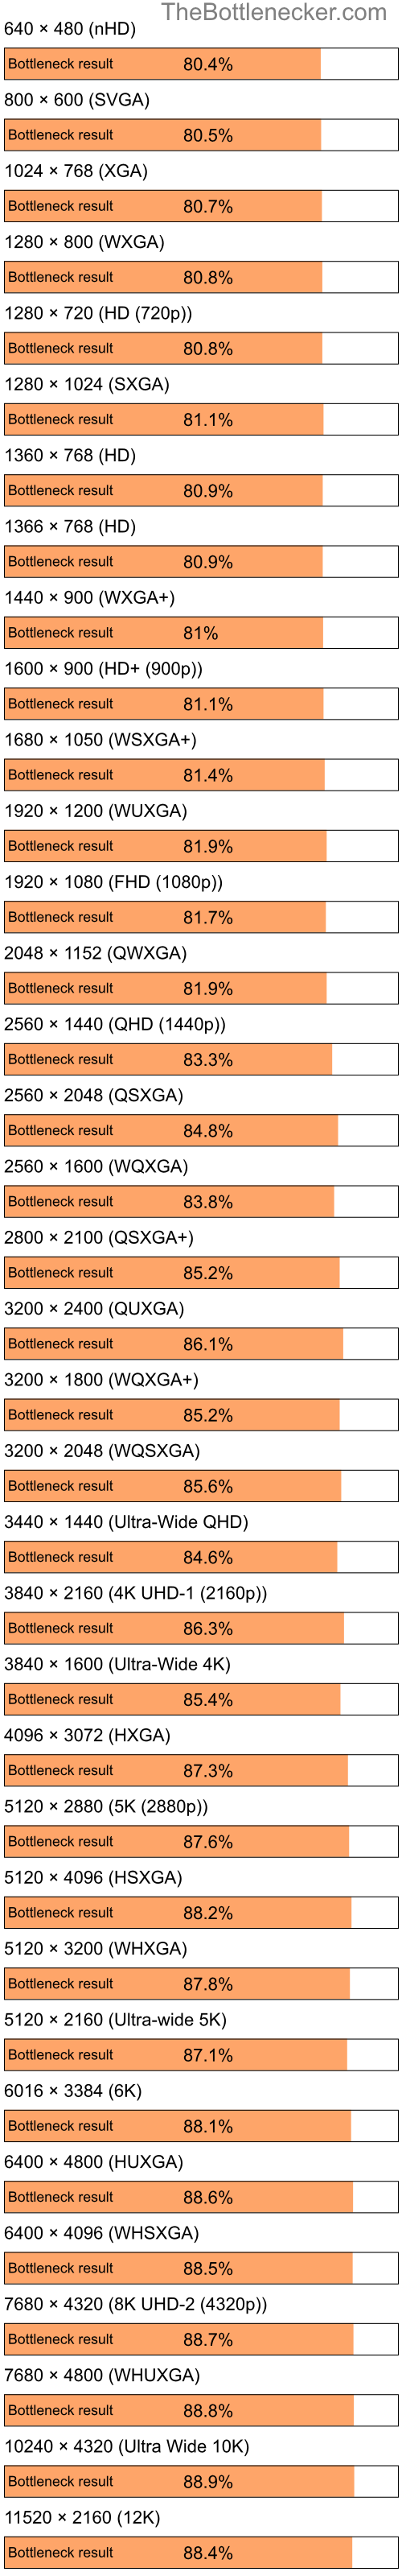 Bottleneck results by resolution for Intel Celeron M 420 and AMD Mobility Radeon X1300 in Graphic Card Intense Tasks